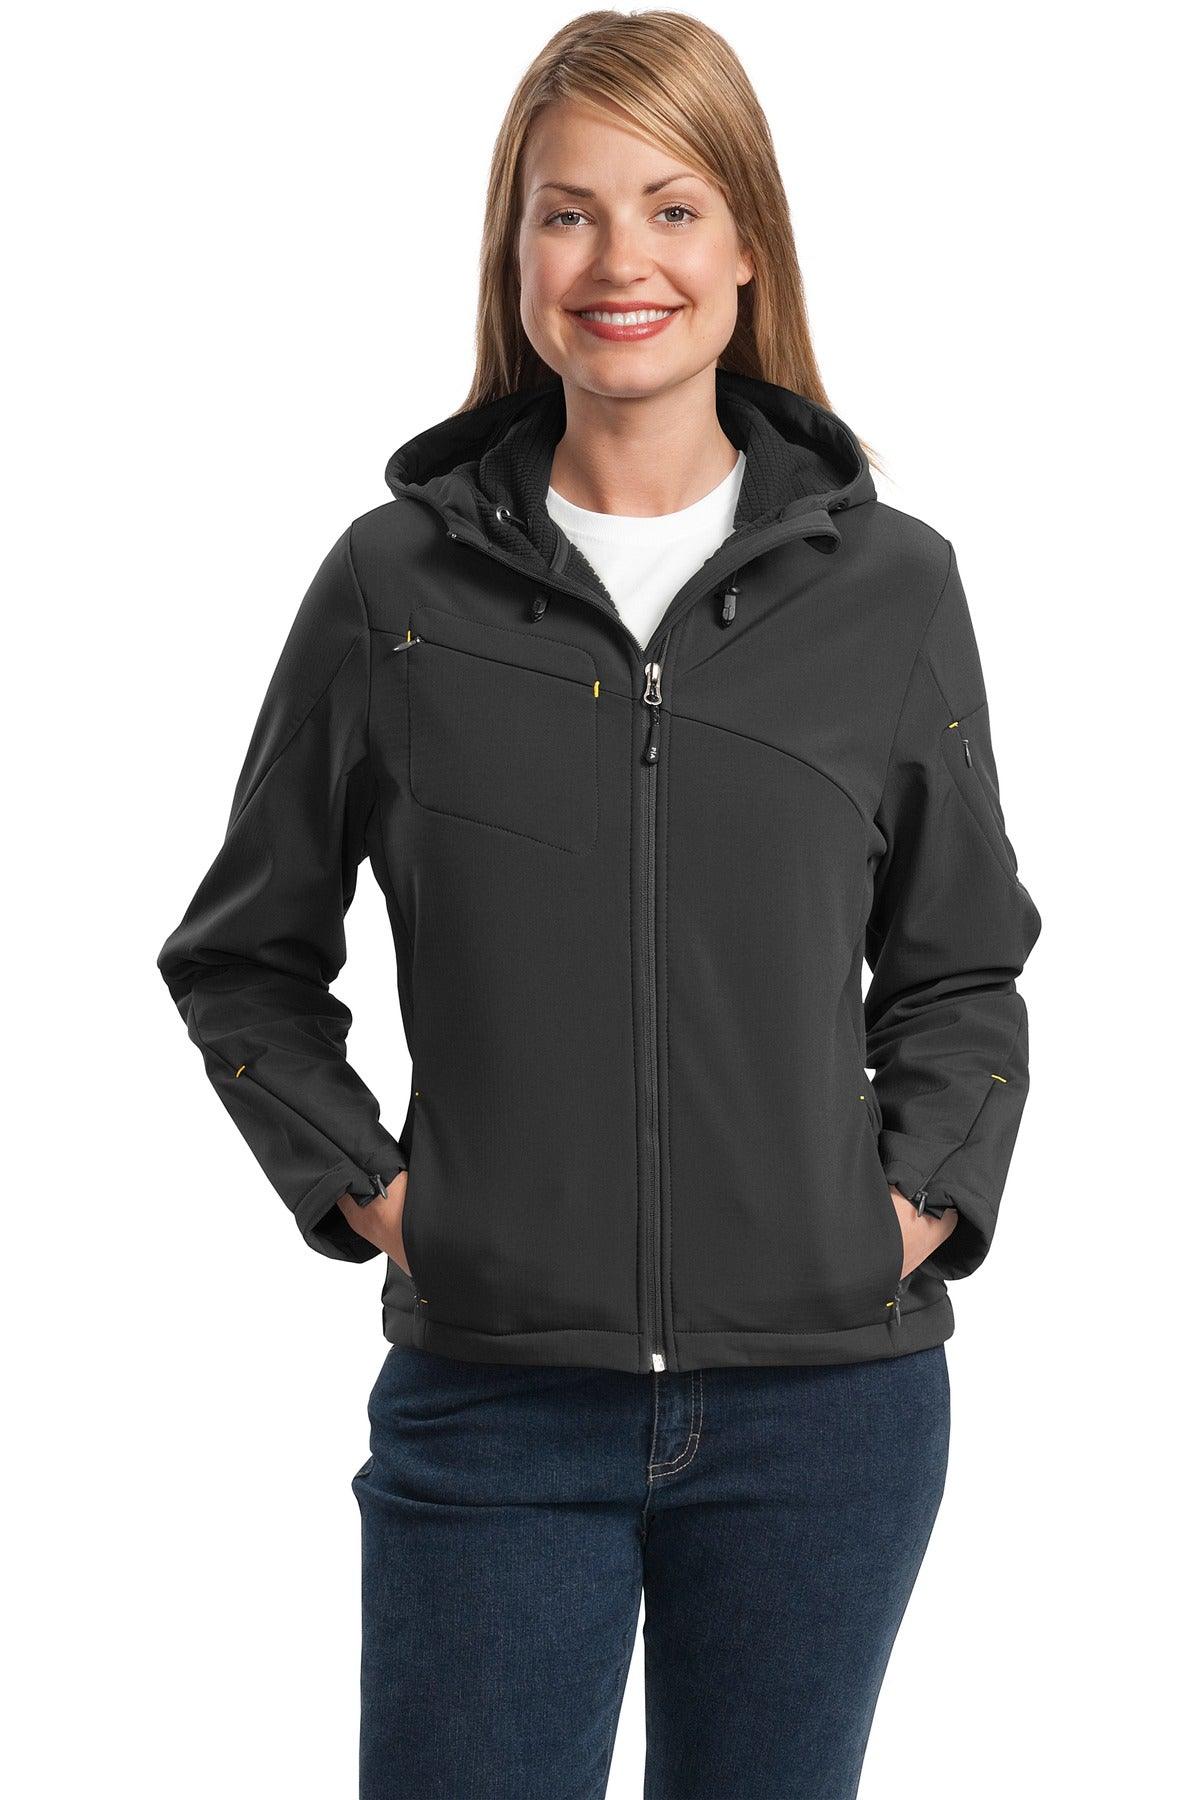 Port Authority Ladies Textured Hooded Soft Shell Jacket. L706 - Dresses Max